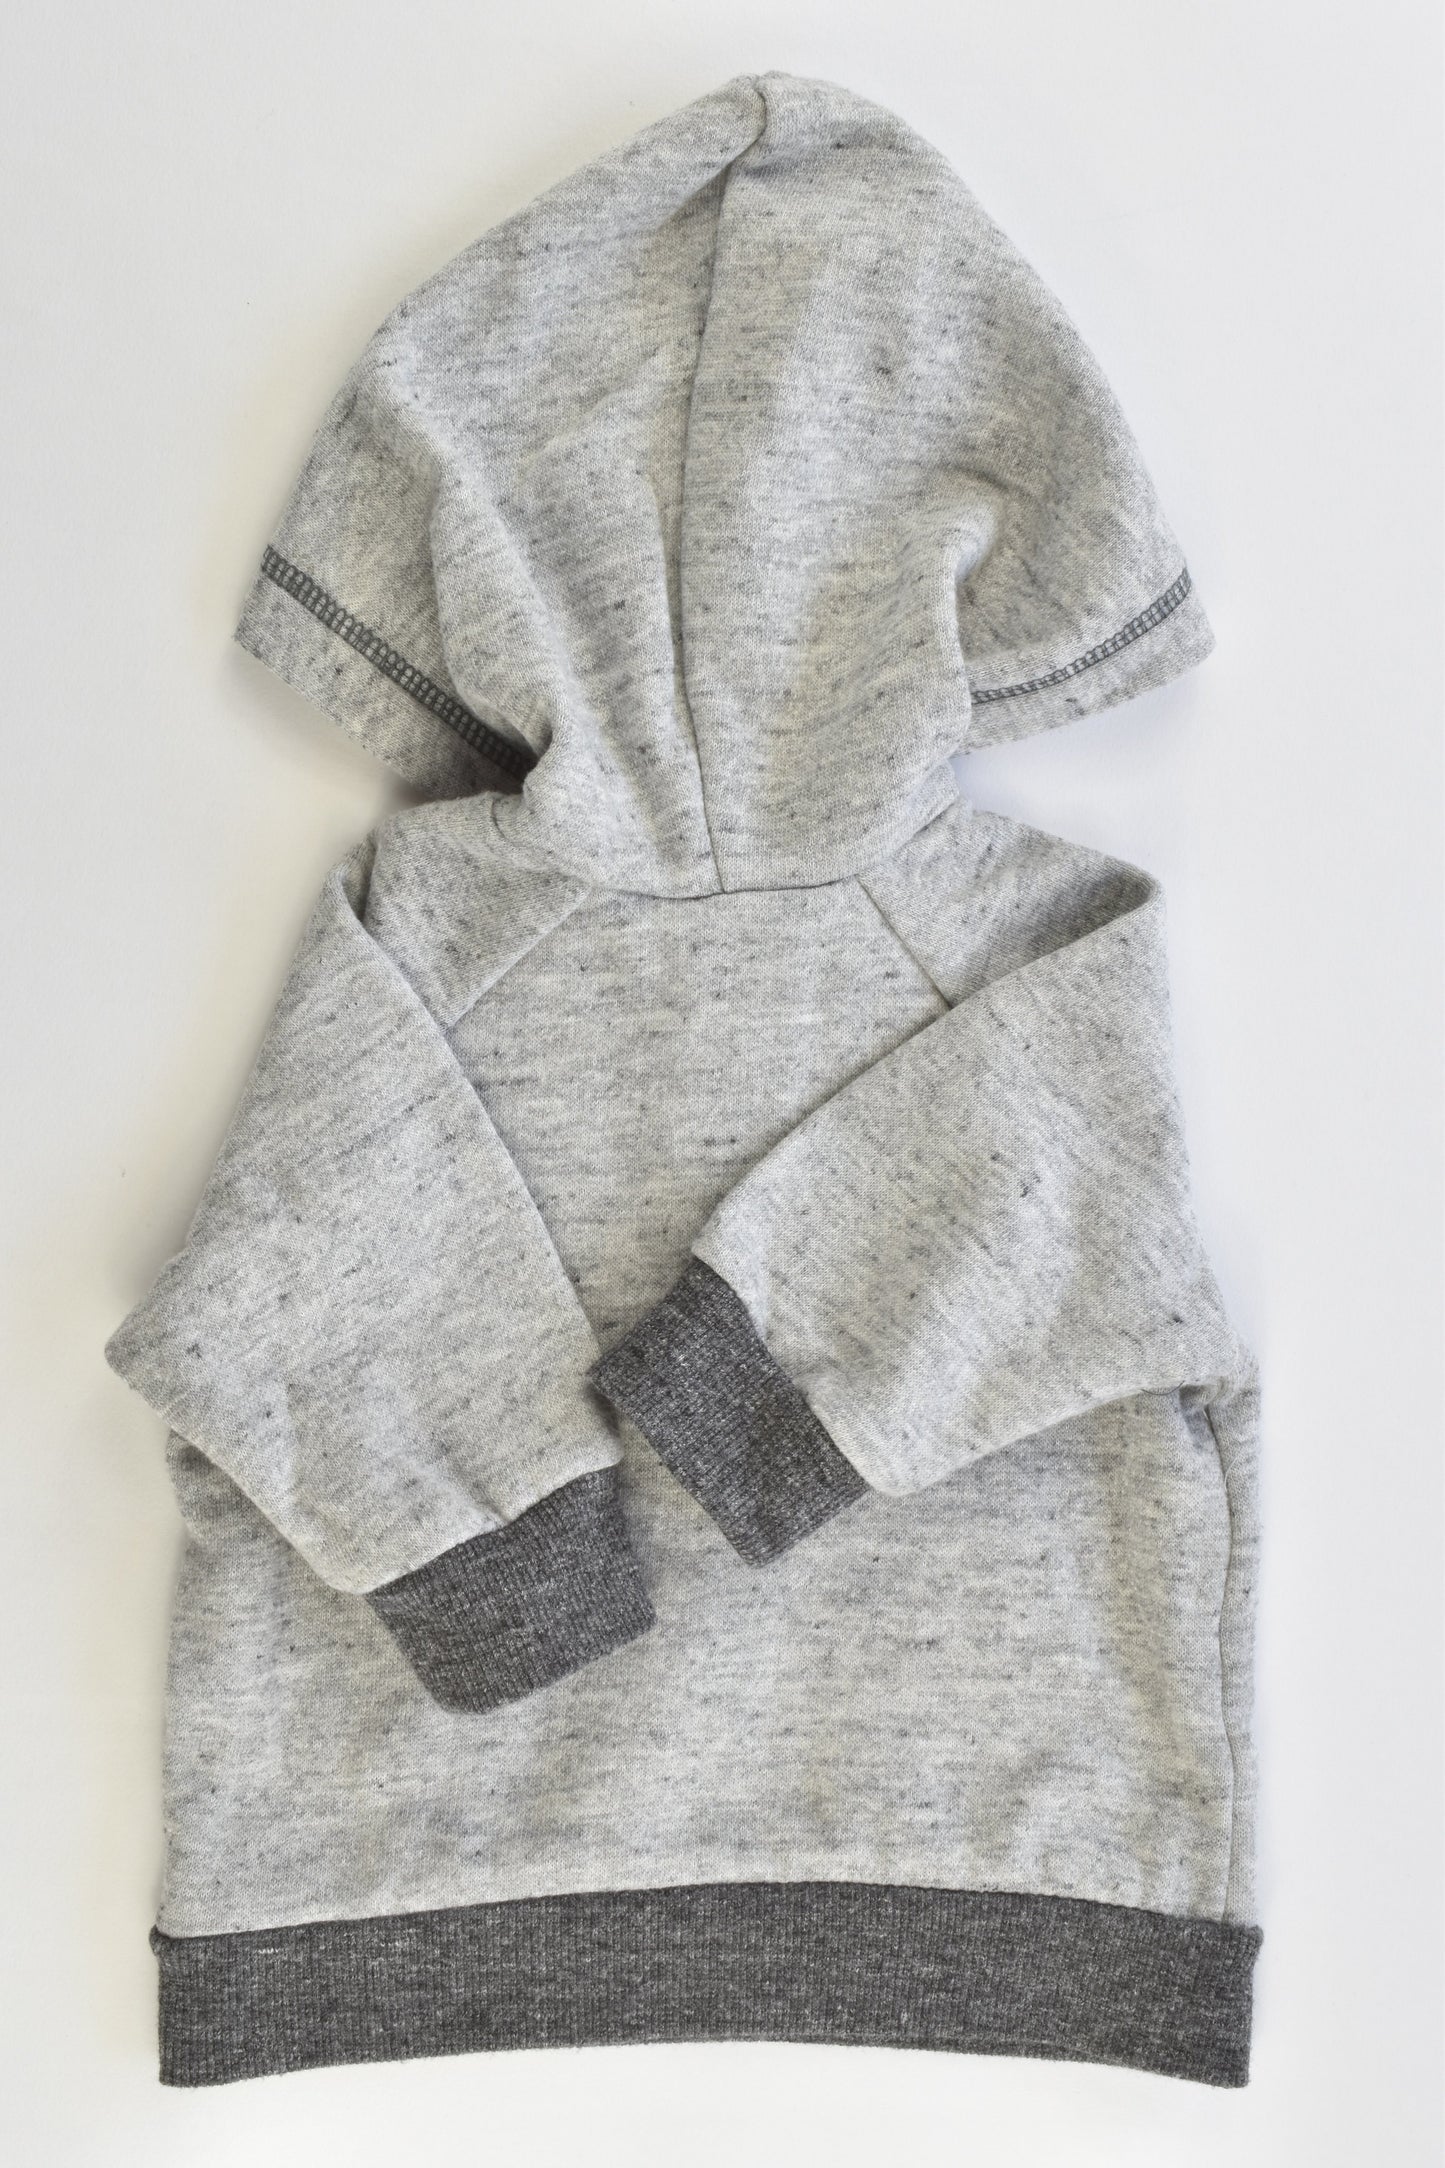 Cotton On Baby Size 000 (0-3 months) Hooded Jumper